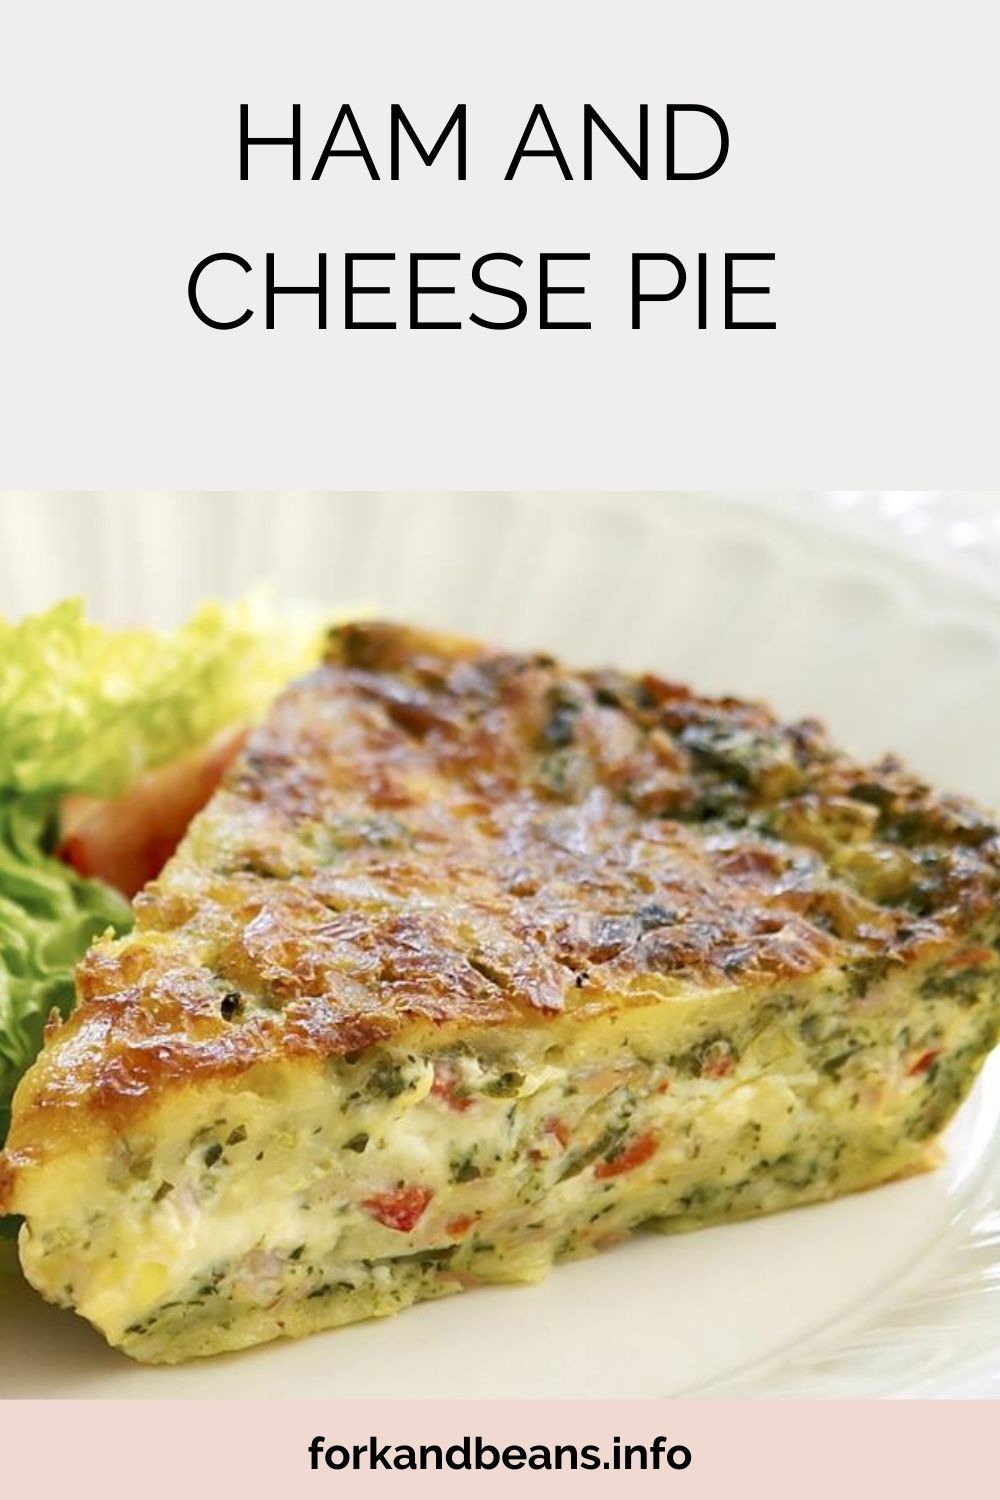 Pie with cheese, ham, and spinach is impossible